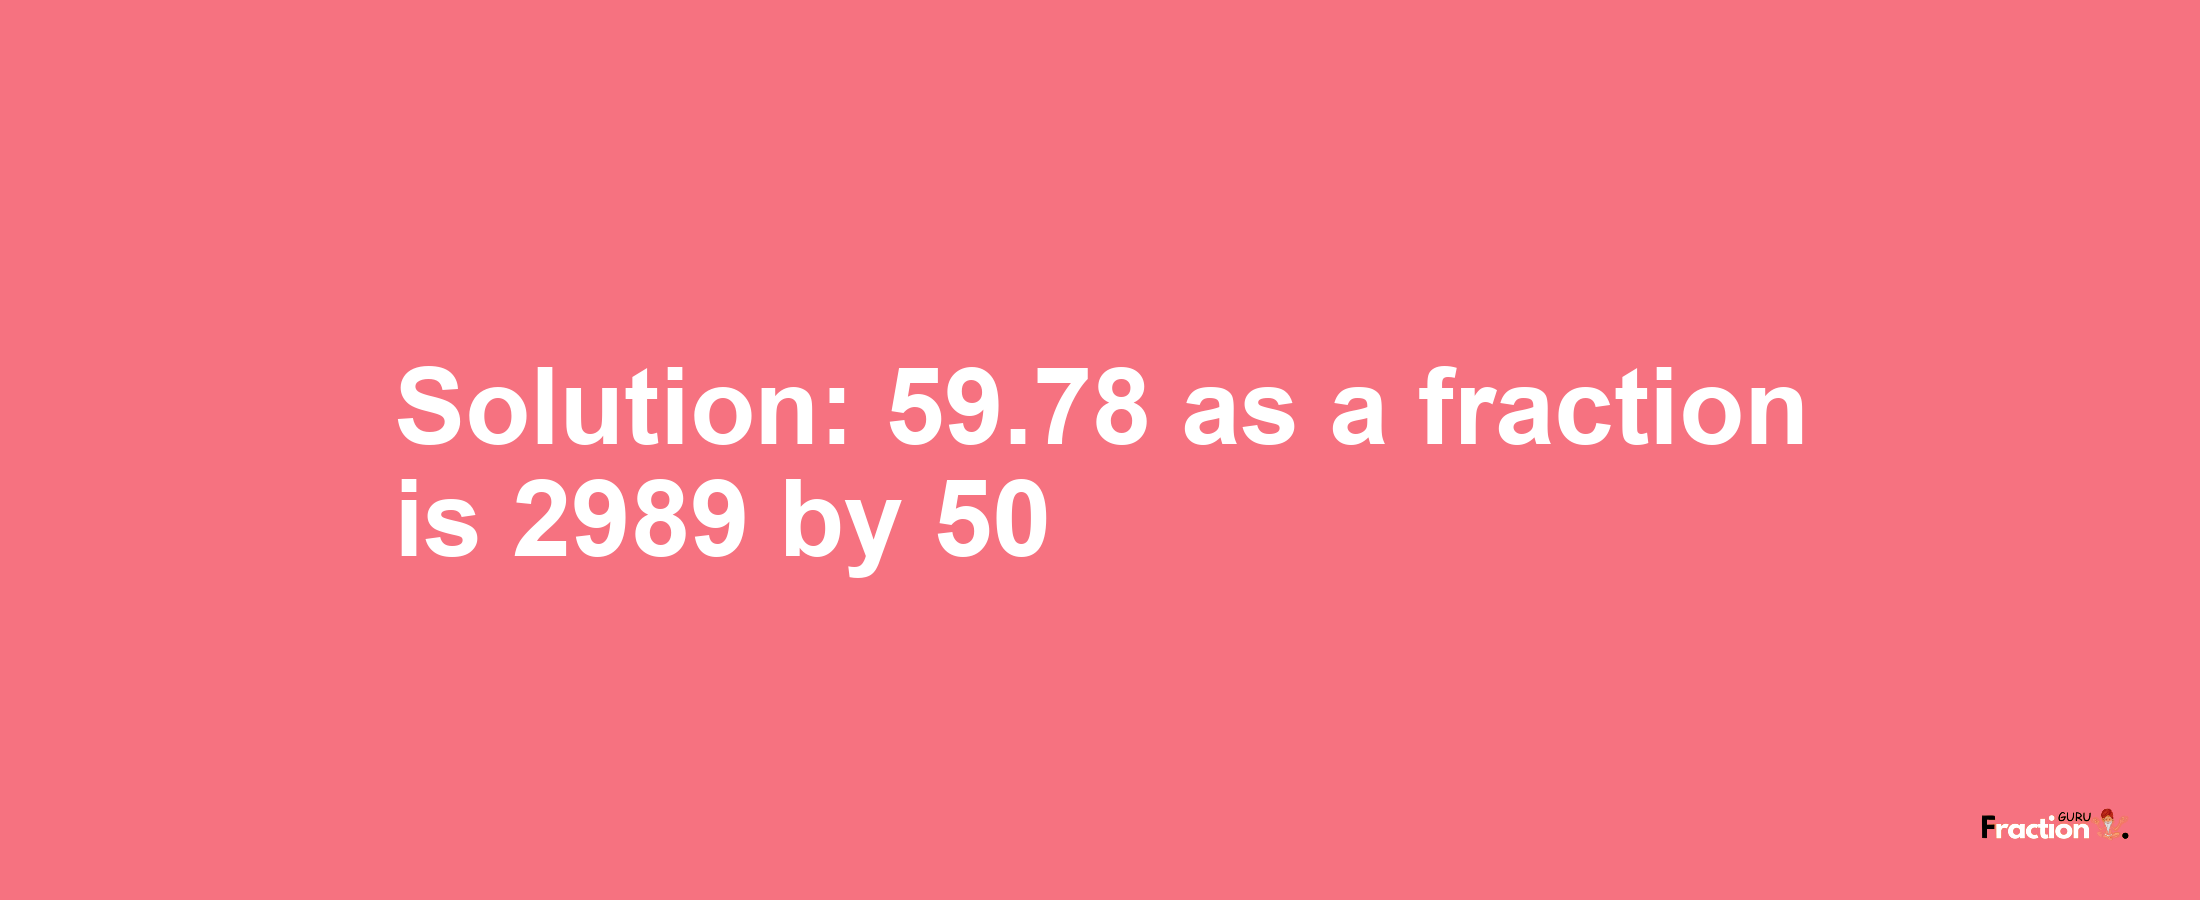 Solution:59.78 as a fraction is 2989/50